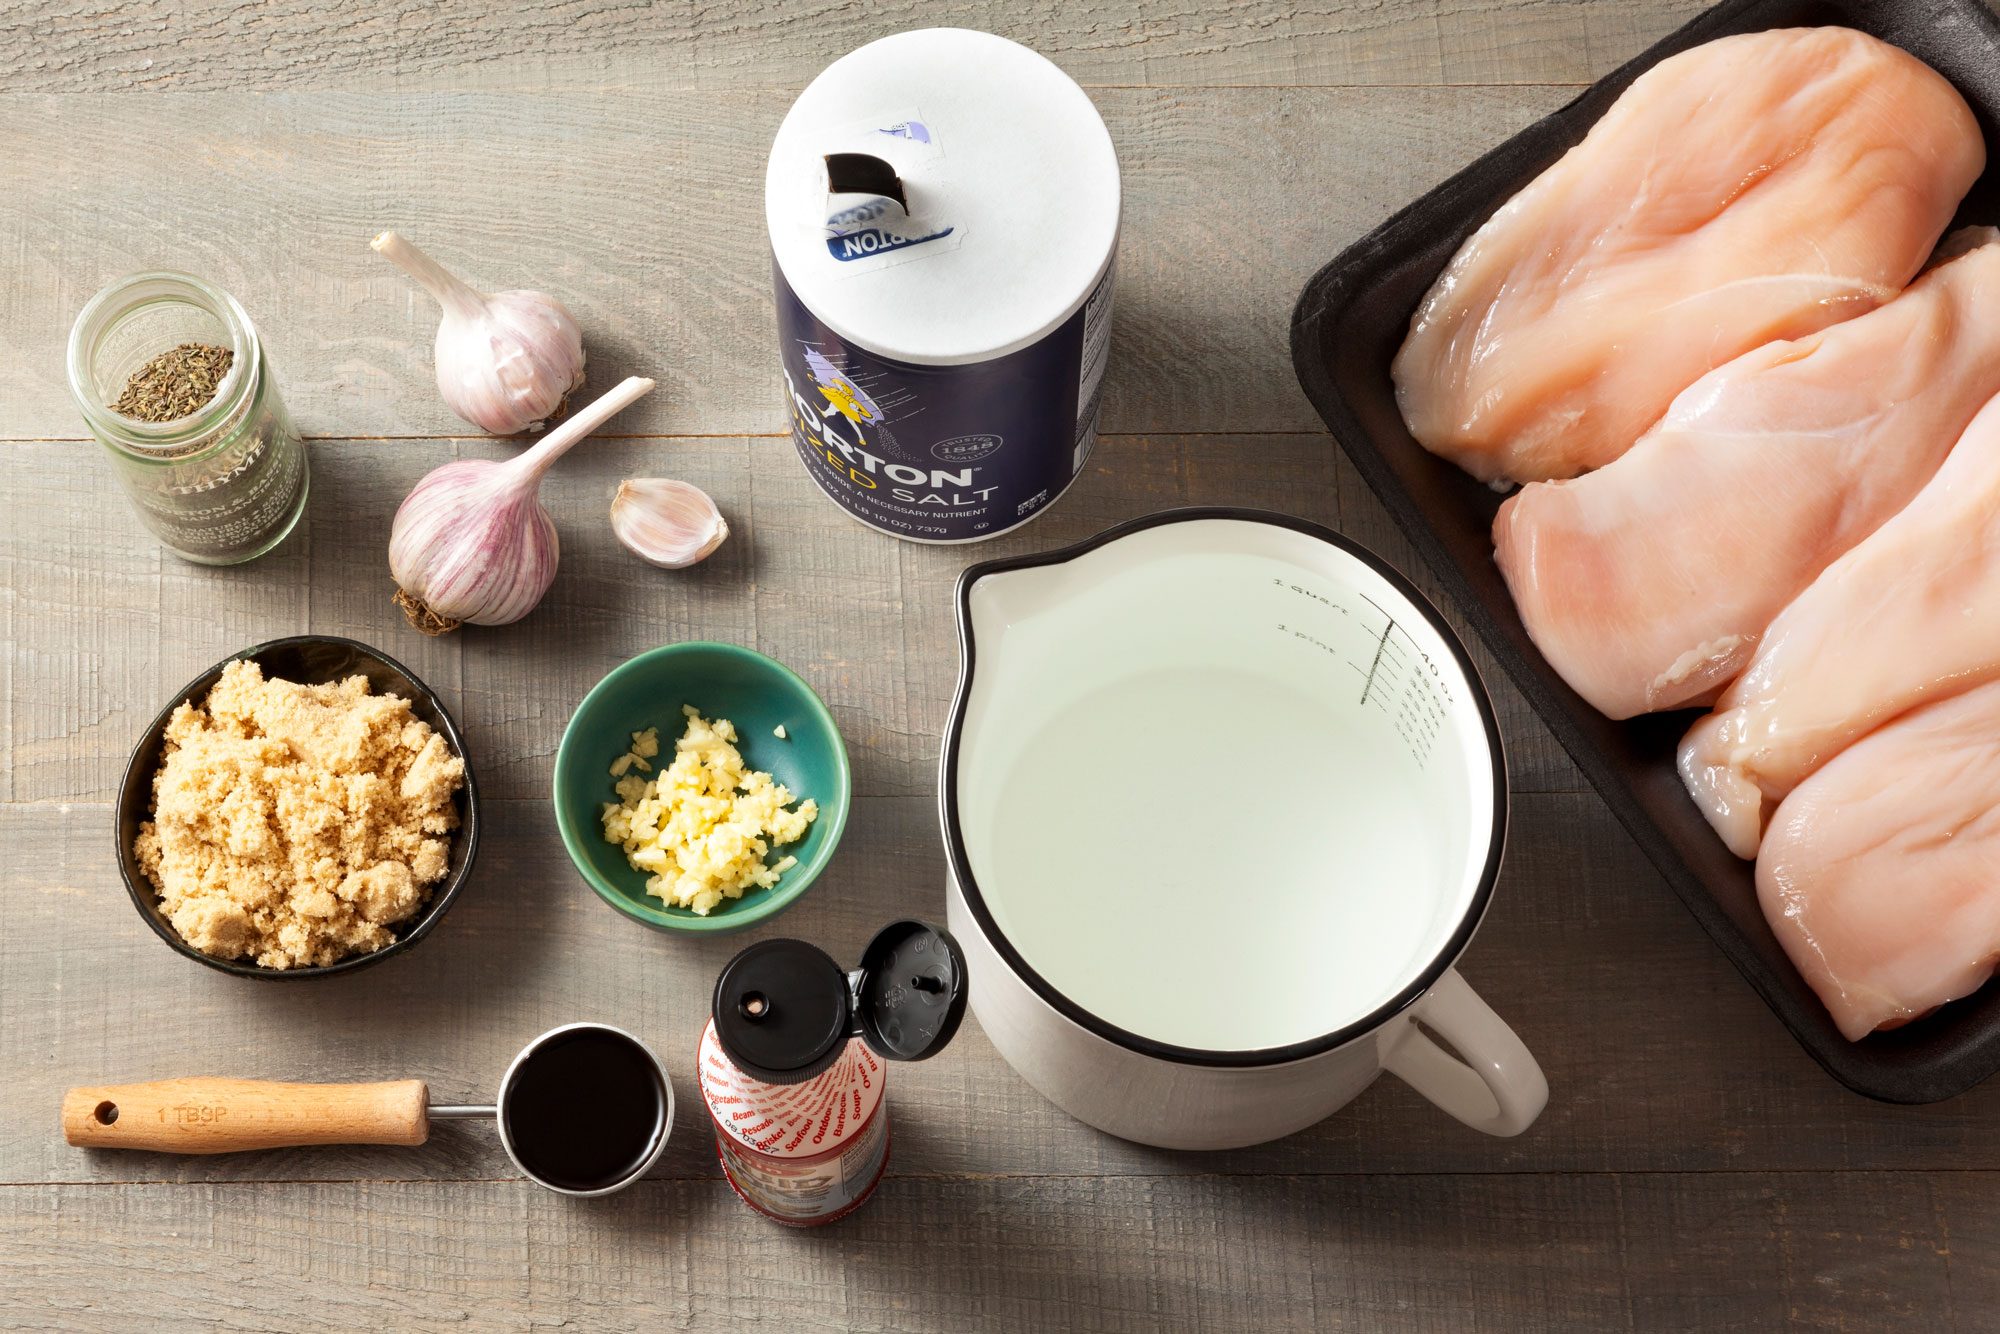 Ingredients for Barbecue Chicken Sliders on Wooden Surface